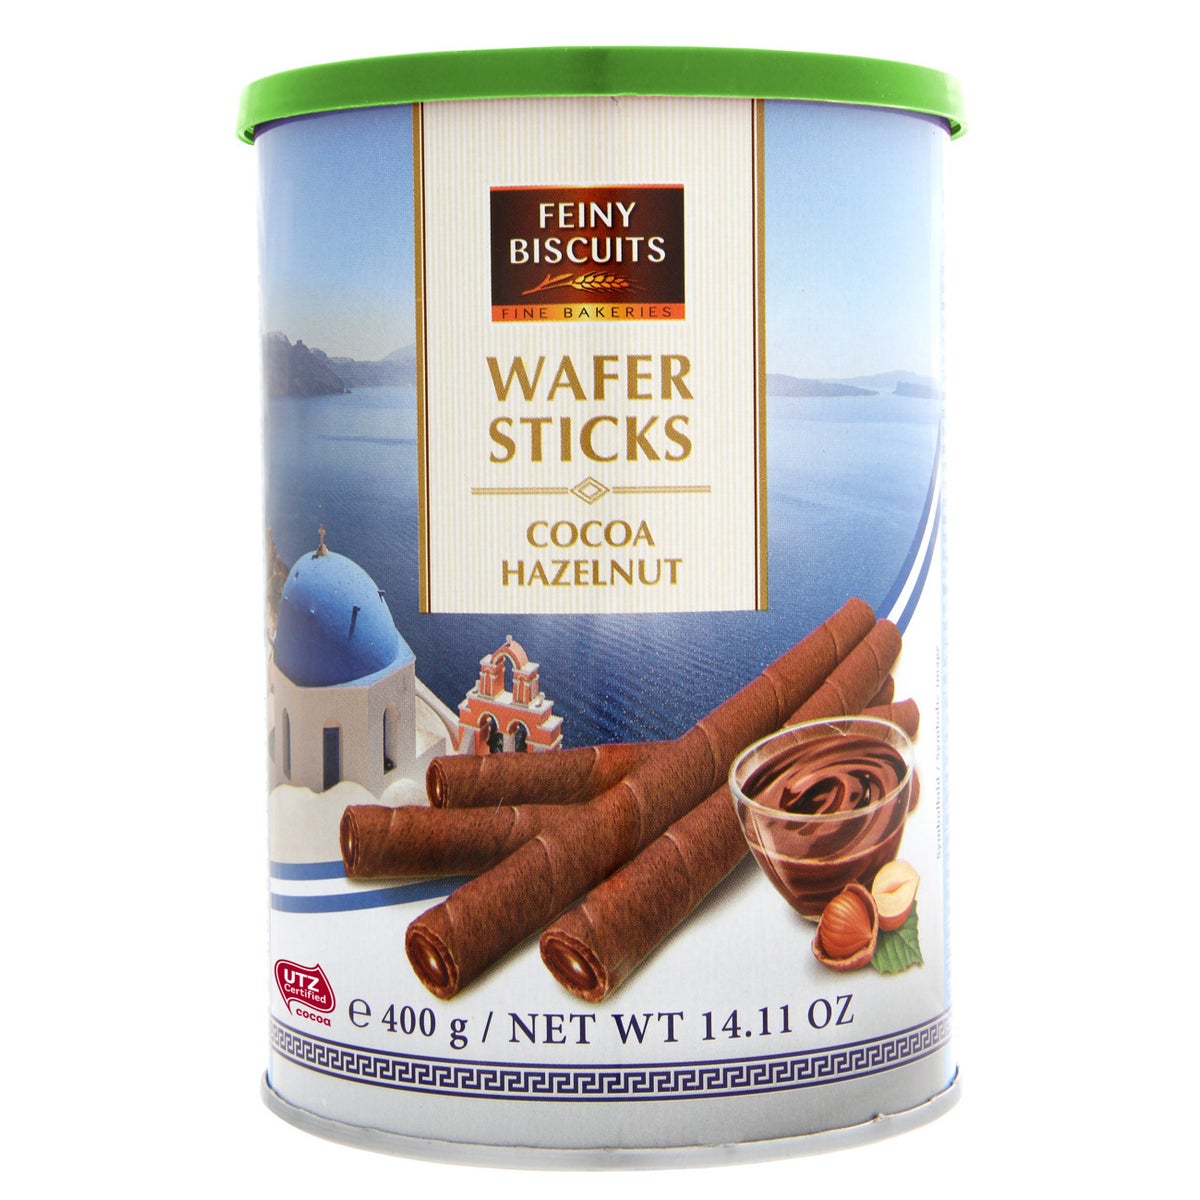 Feiny Biscuits Rolled Wafers with Cocoa Hazelnut Cream Filli 900285908215